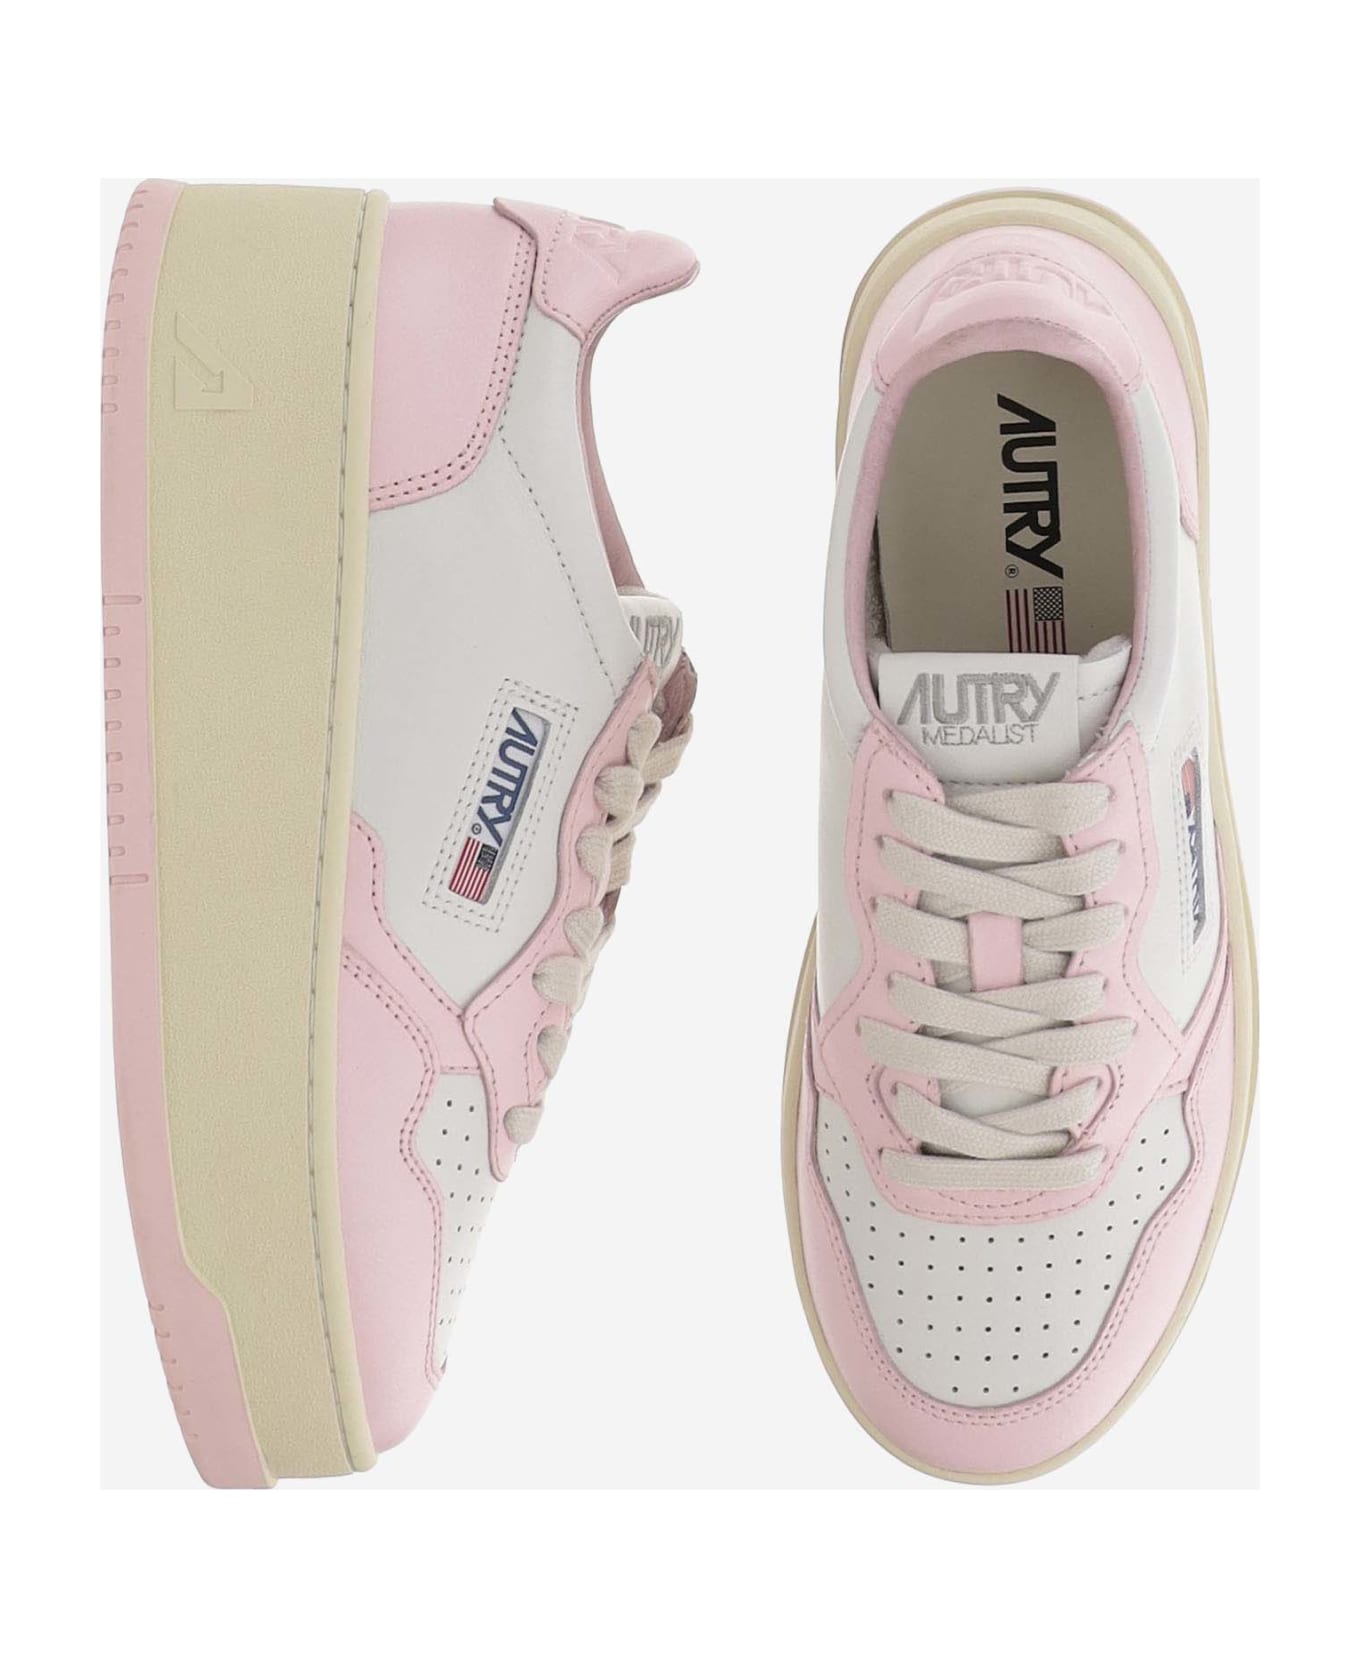 Autry Medalist Platform Low Leather Sneakers - Pink スニーカー